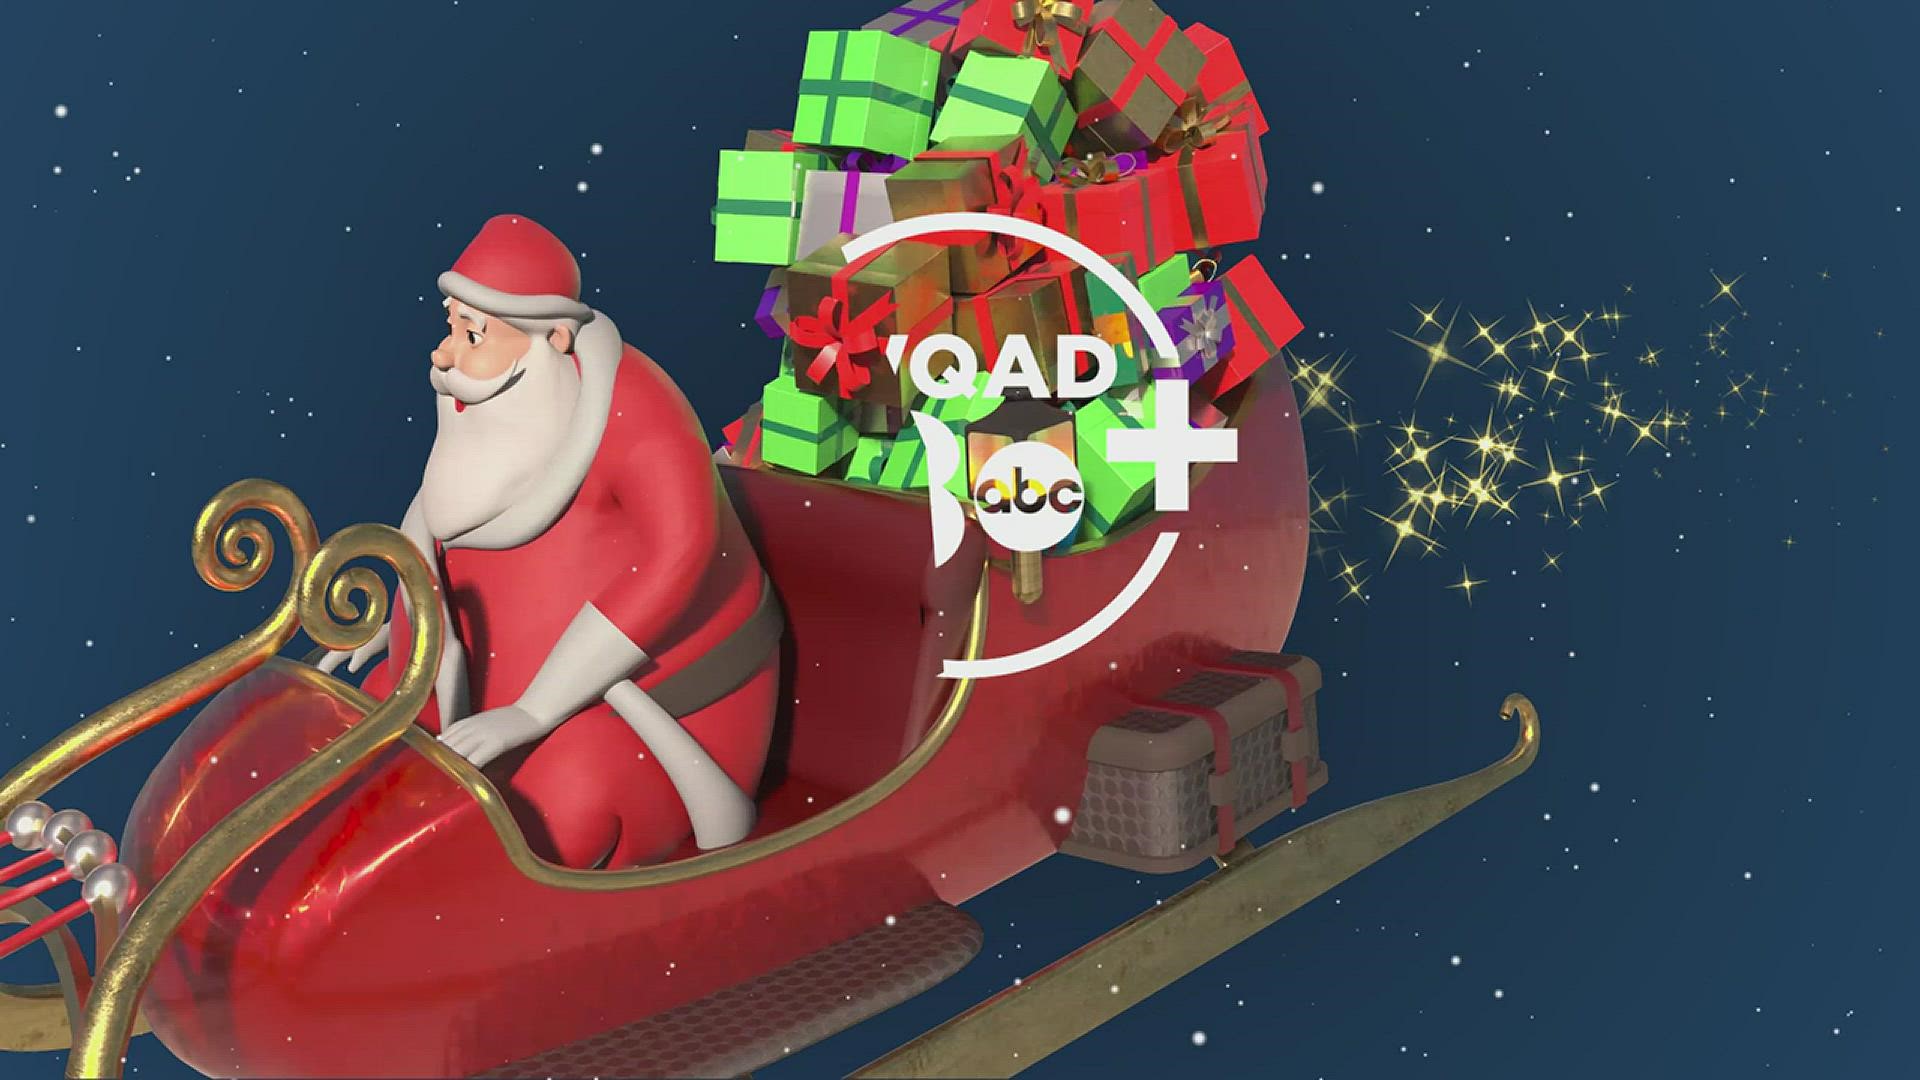 The NORAD tracker will be available for Christmas 2022 on the WQAD+ app on Roku and Amazon FireTV.